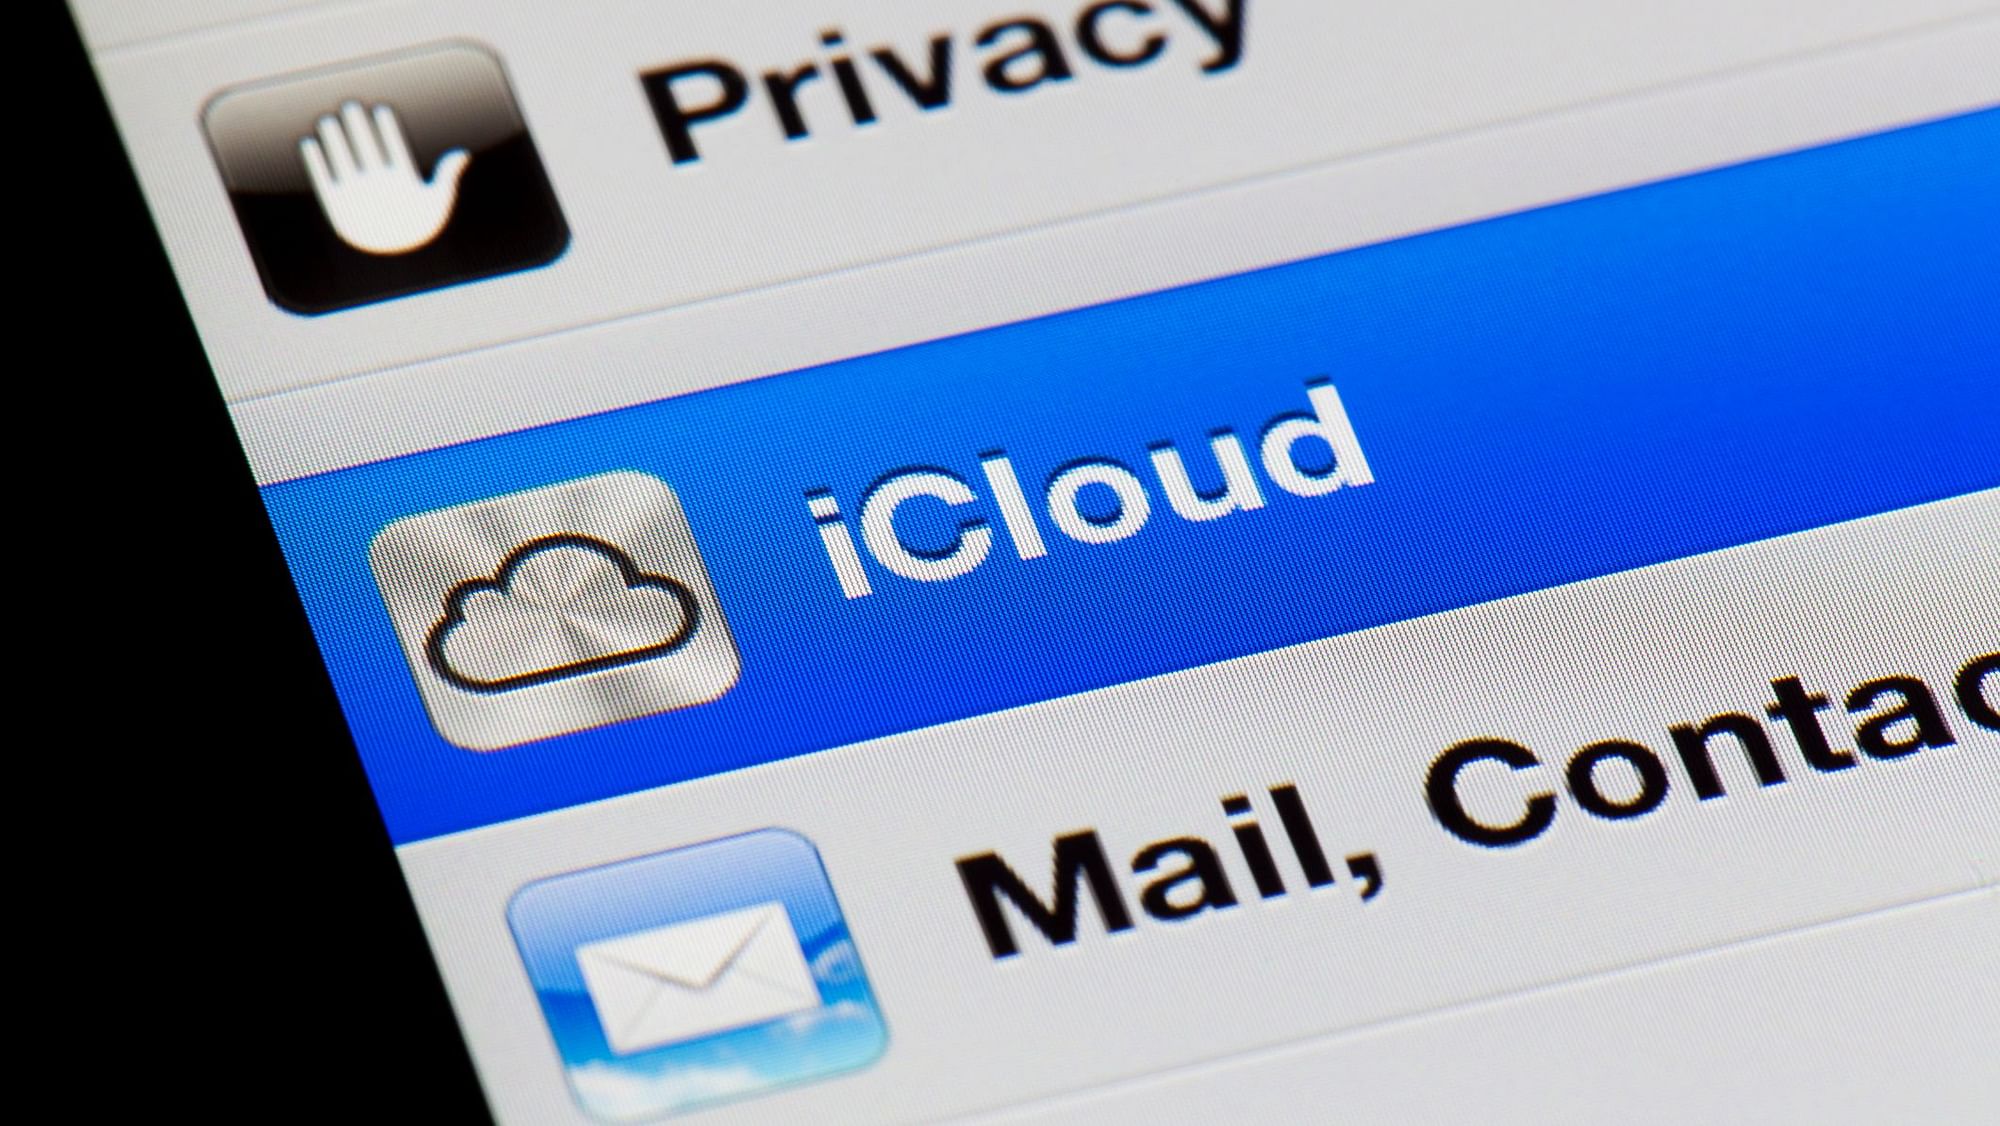 iCloud users were unable to sign in to their accounts.